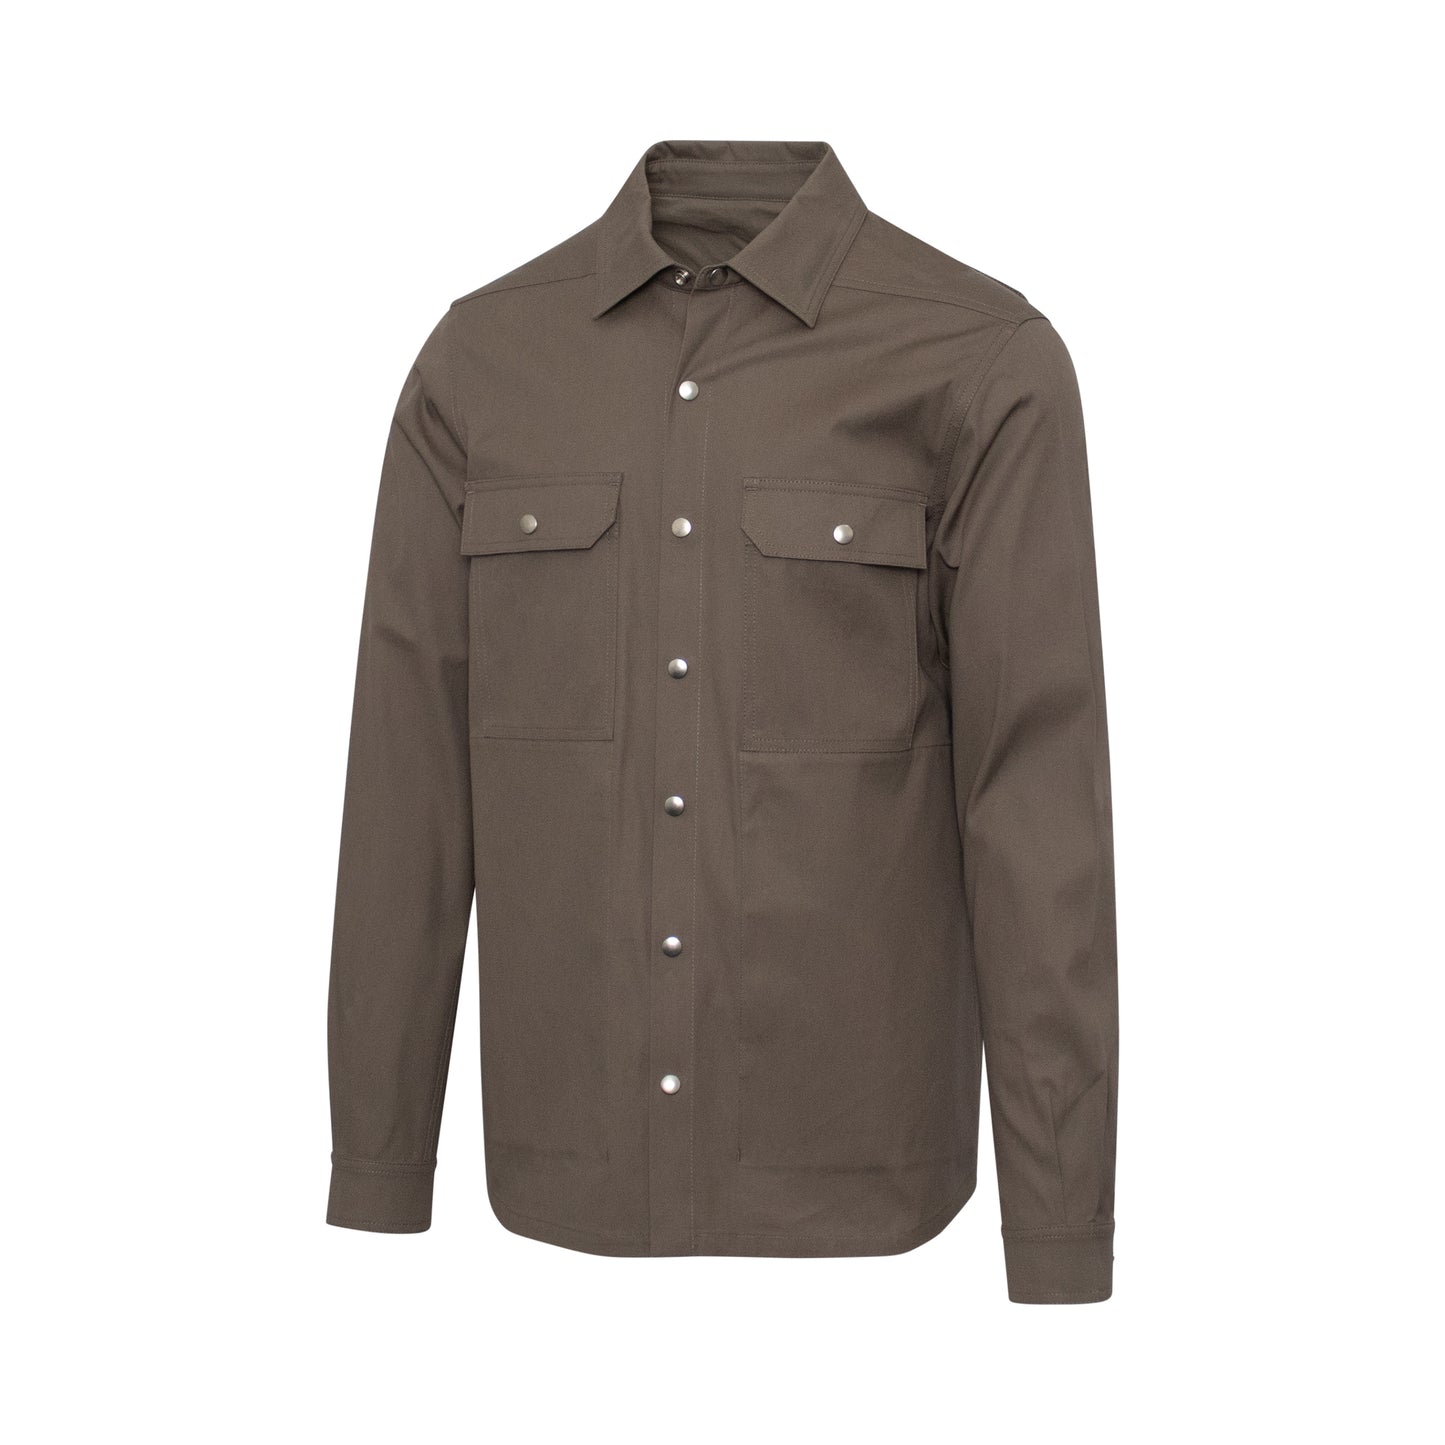 Outershirt Jacket in Dust